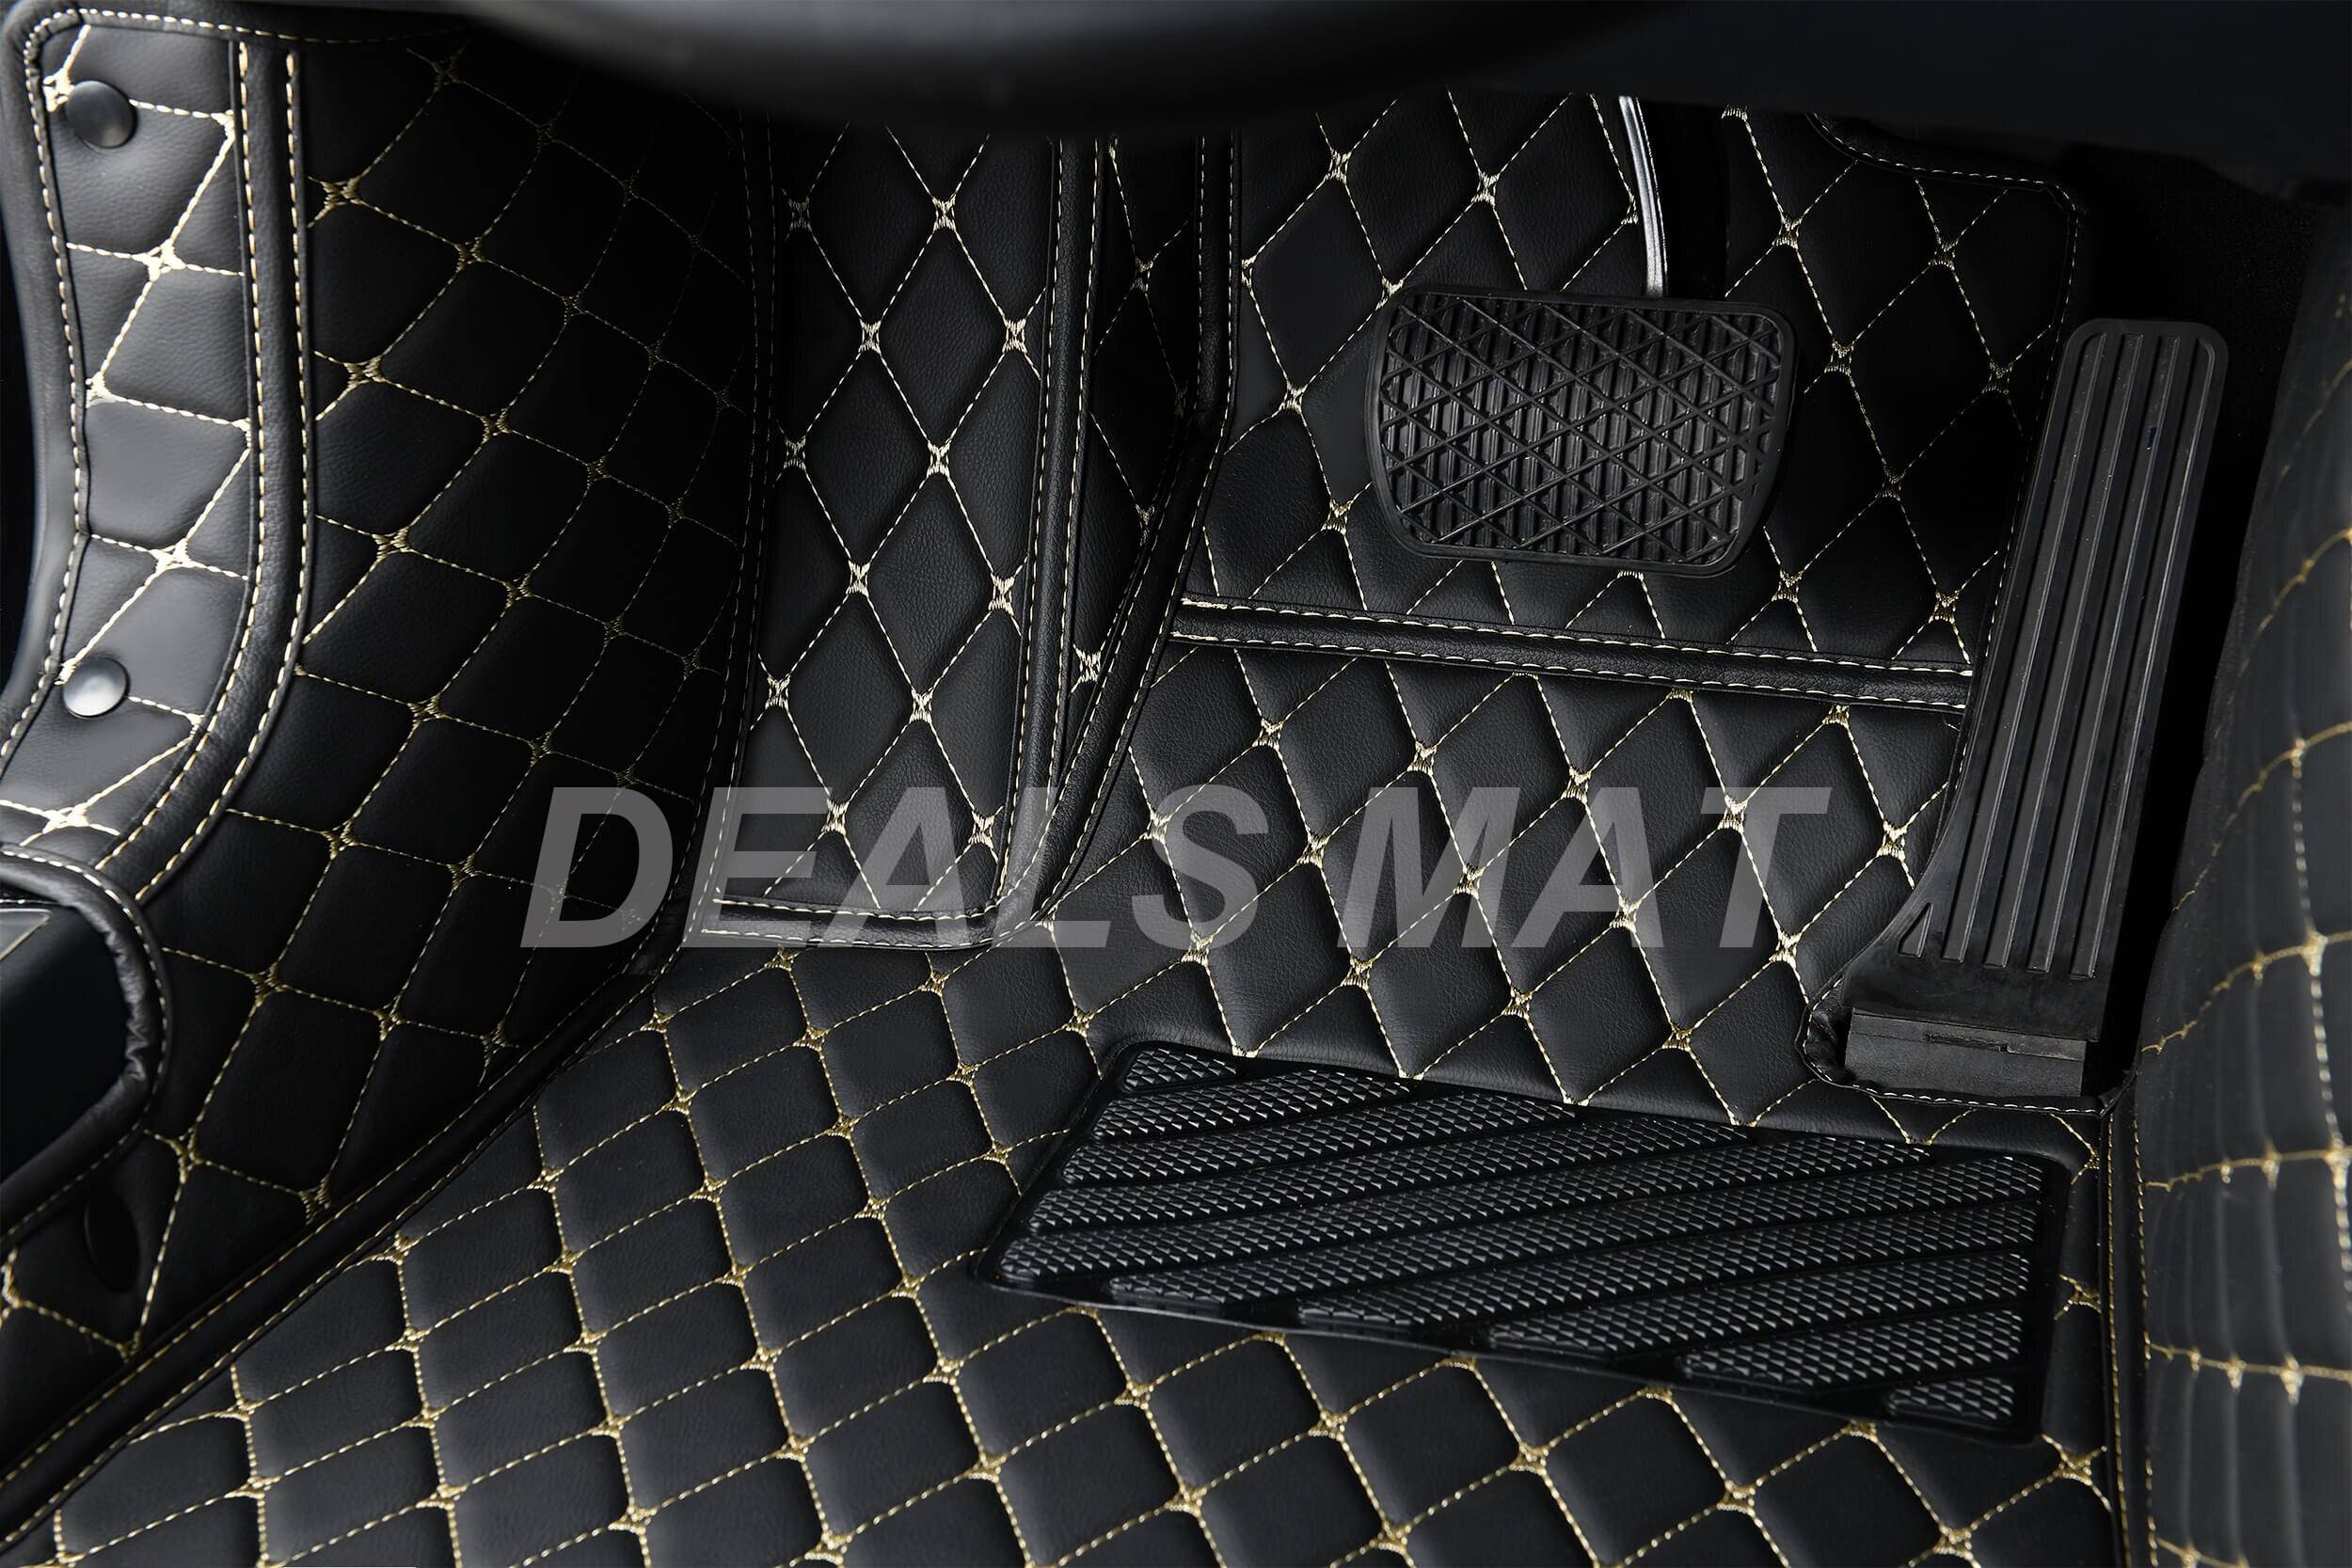 Custom Made Leather Car Floor Mats For Mitsubishi Outlander 2008 2012 2013 2016 2018 2019 Carpets Rugs Foot Pads Accessories Color Name : Price for 1 seat|Price for 1 seat|Price for 1 seat|Price for 1 seat|Price for 1 seat|Price for 1 seat|Price for 1 seat|Price for 5 seats|Price for 5 seats|Price for 5 seats|Price for 5 seats|Price for 5 seats|Price for 5 seats|Price for 5 seats|Price for 5 seats|Price for 5 seats|Price for 5 seats 